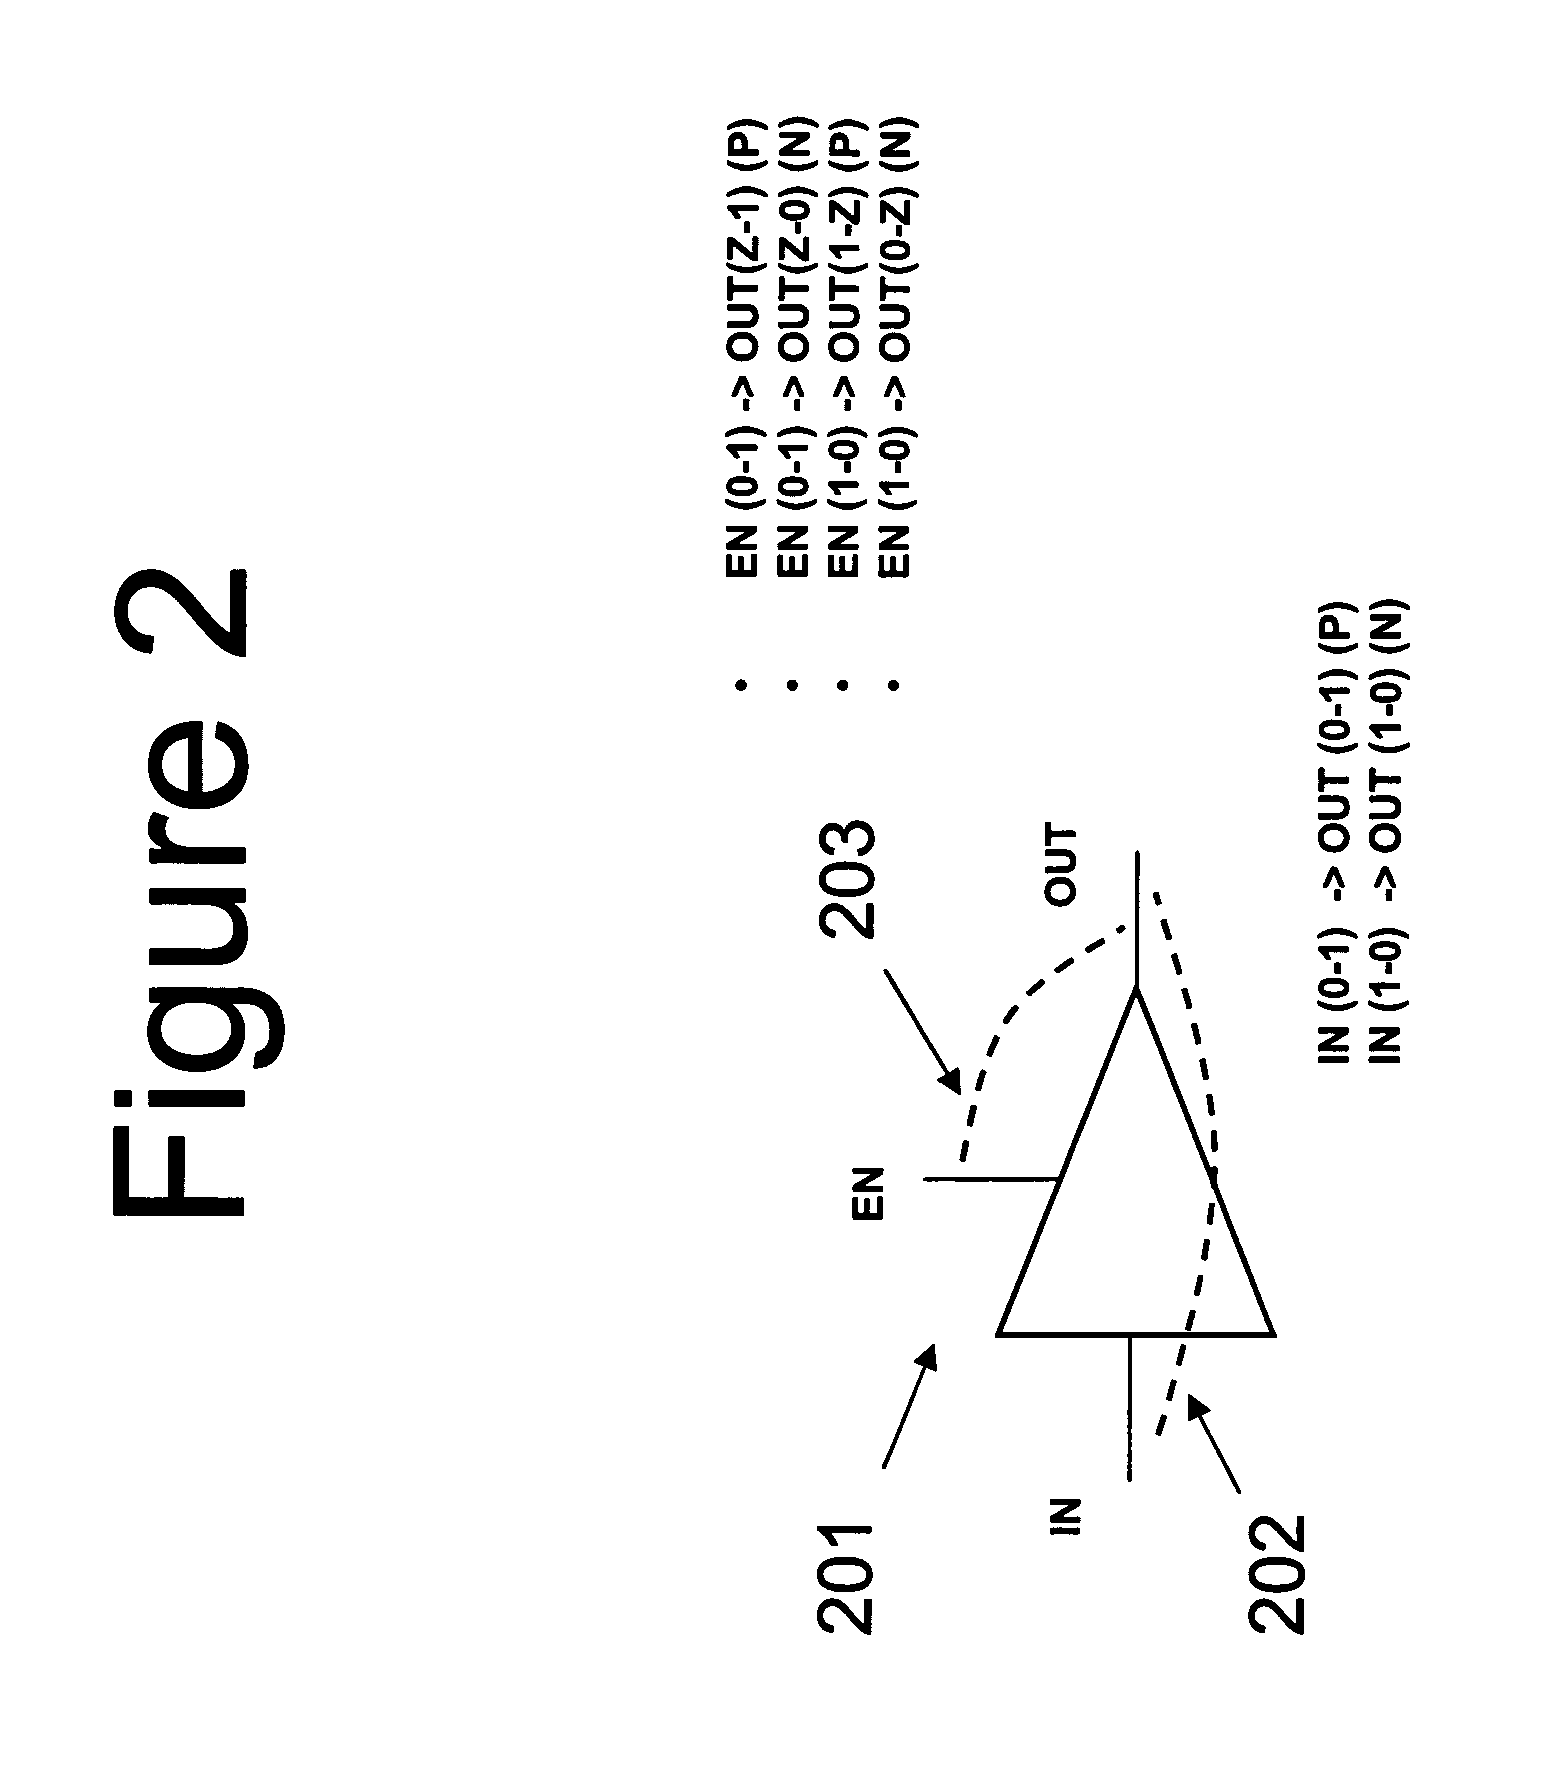 System and method for performing transistor-level static performance analysis using cell-level static analysis tools